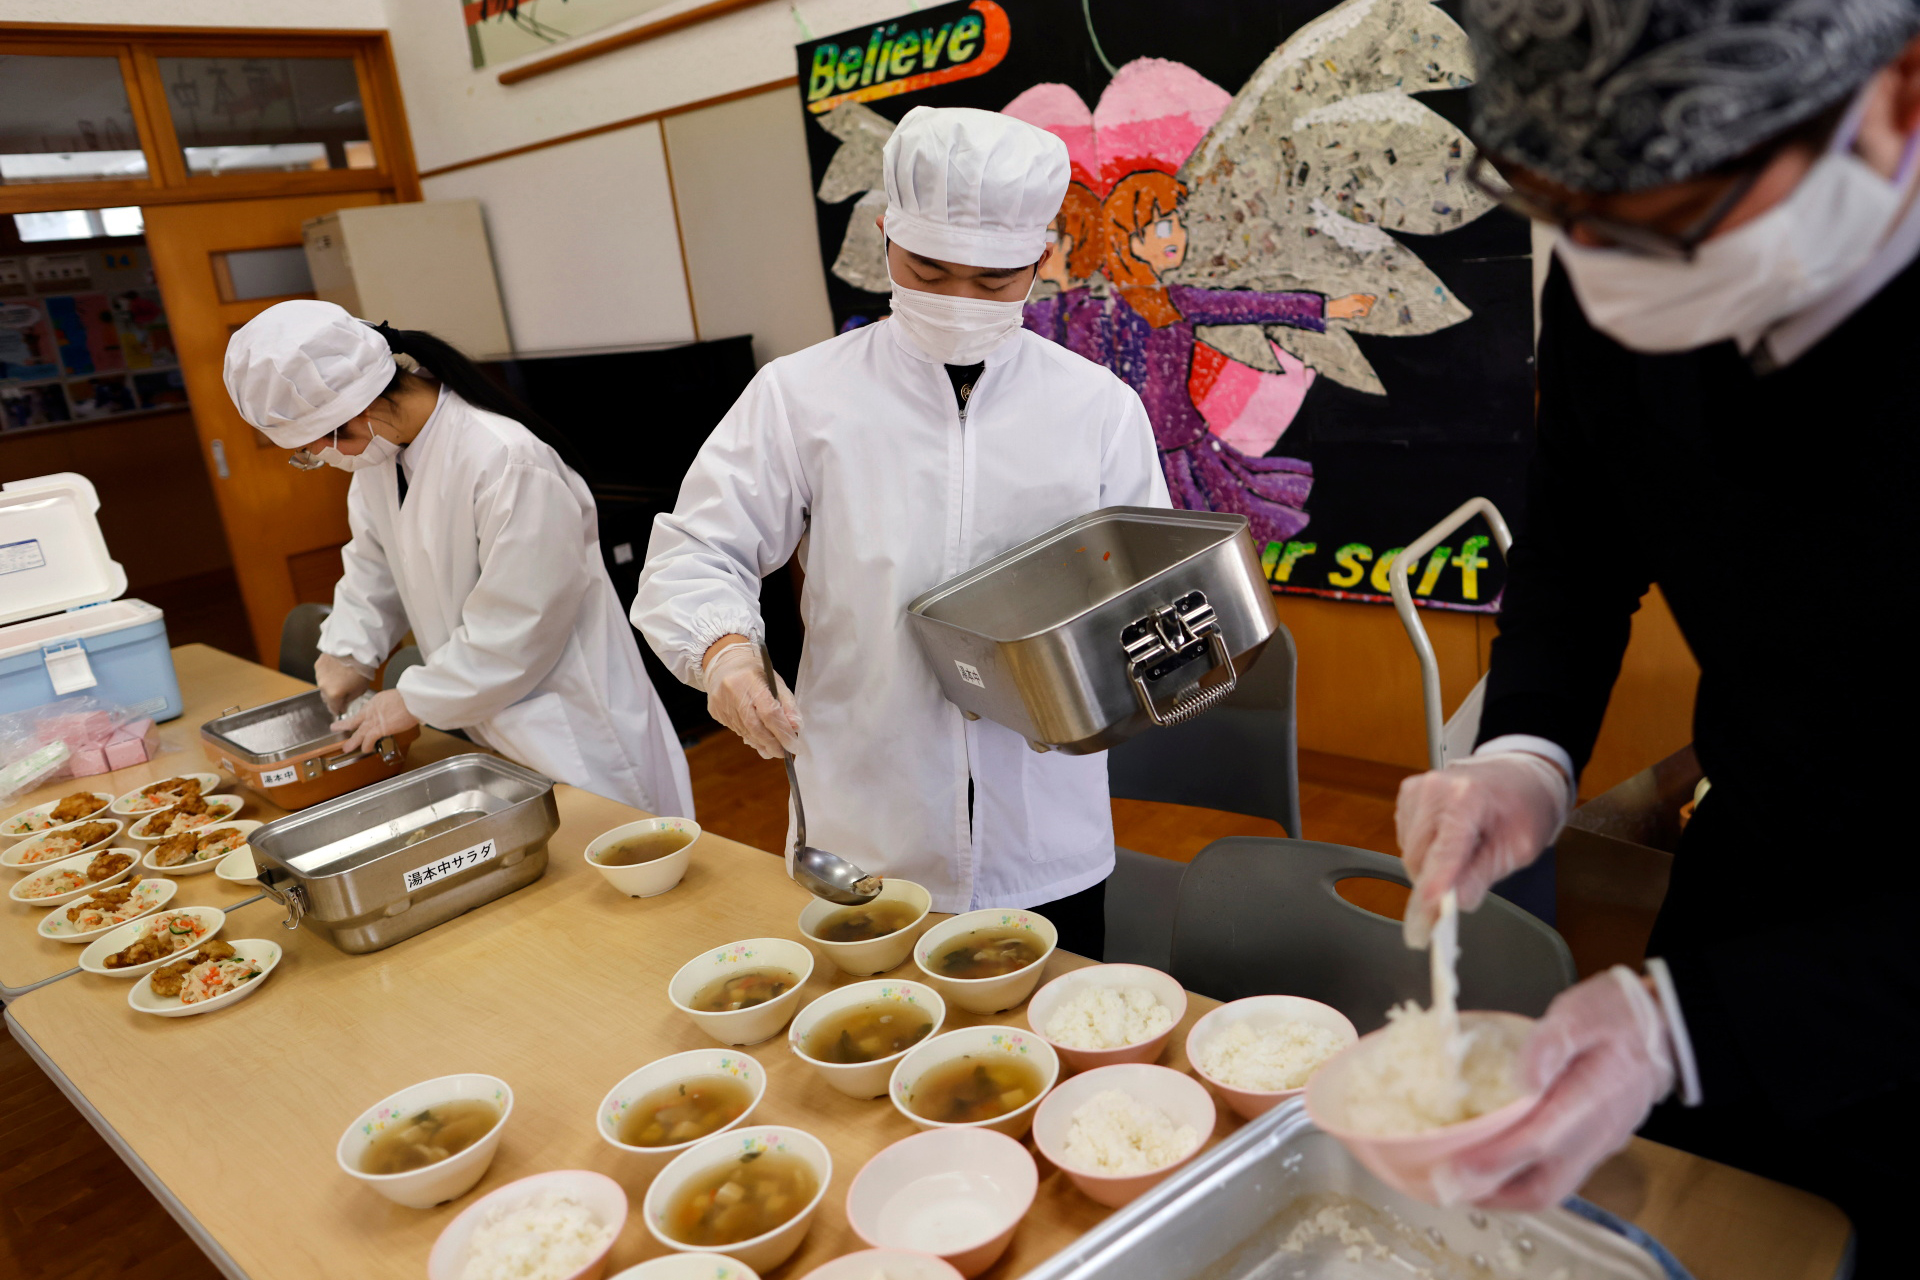 Eita and Aoi, serve their last school lunch for themselves and their teachers a few days before graduation and the school’s closing ceremony in Ten-ei Village, Japan, March 9, 2023. Photo: Reuters